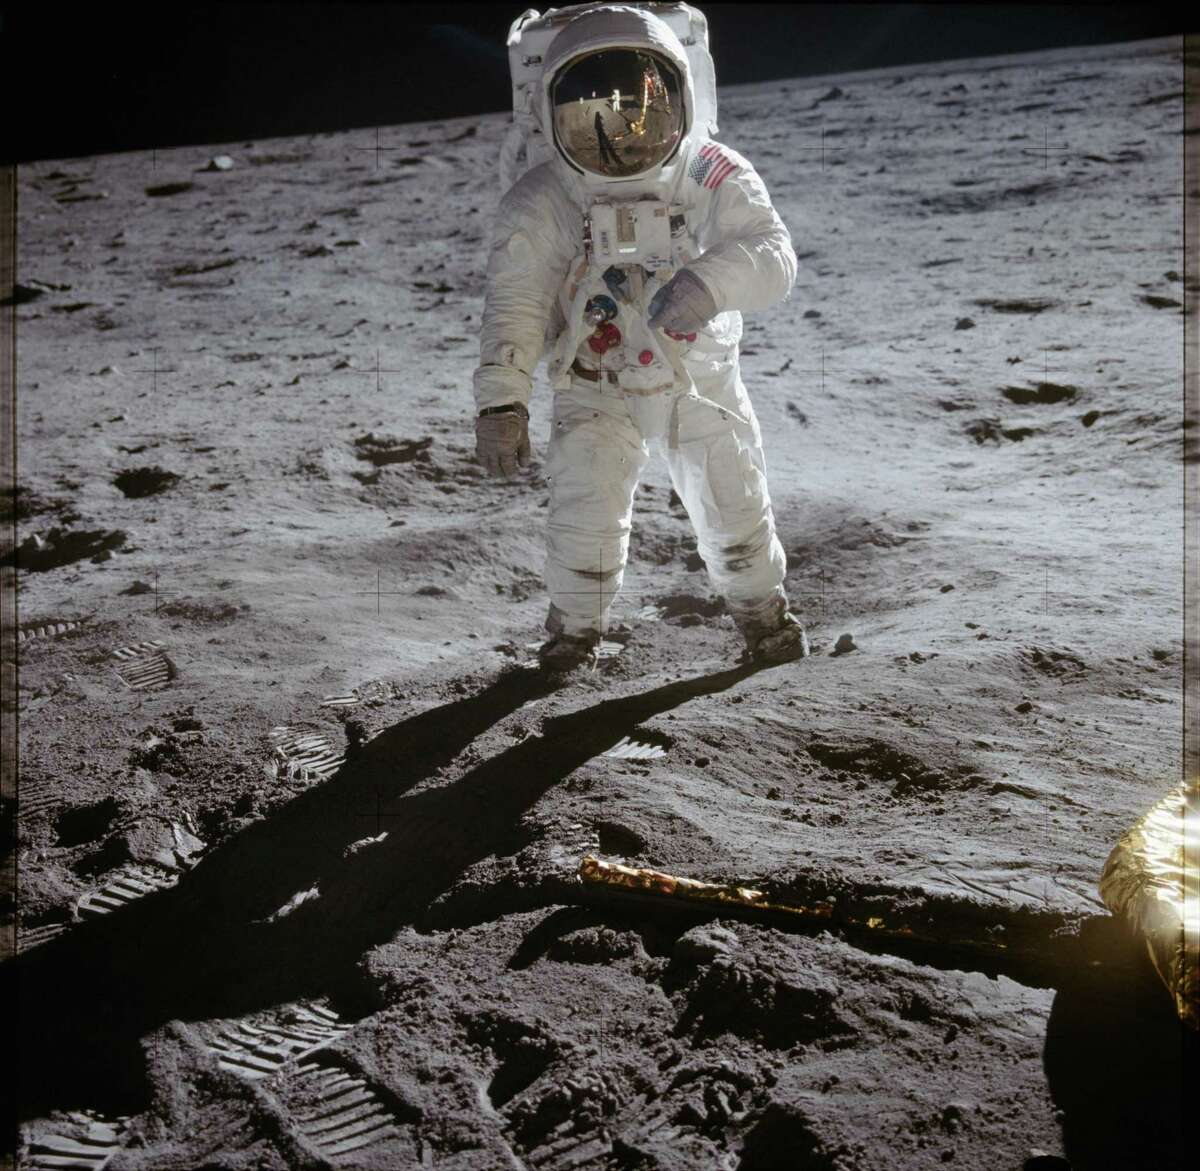 (1969-07-20) This photo is of Edwin Aldrin walking on the lunar surface. Neil Armstrong, who took the photograph, can be seen reflected in Aldrin?•s helmet visor. Armstrong was the first human to ever stand on the lunar surface.